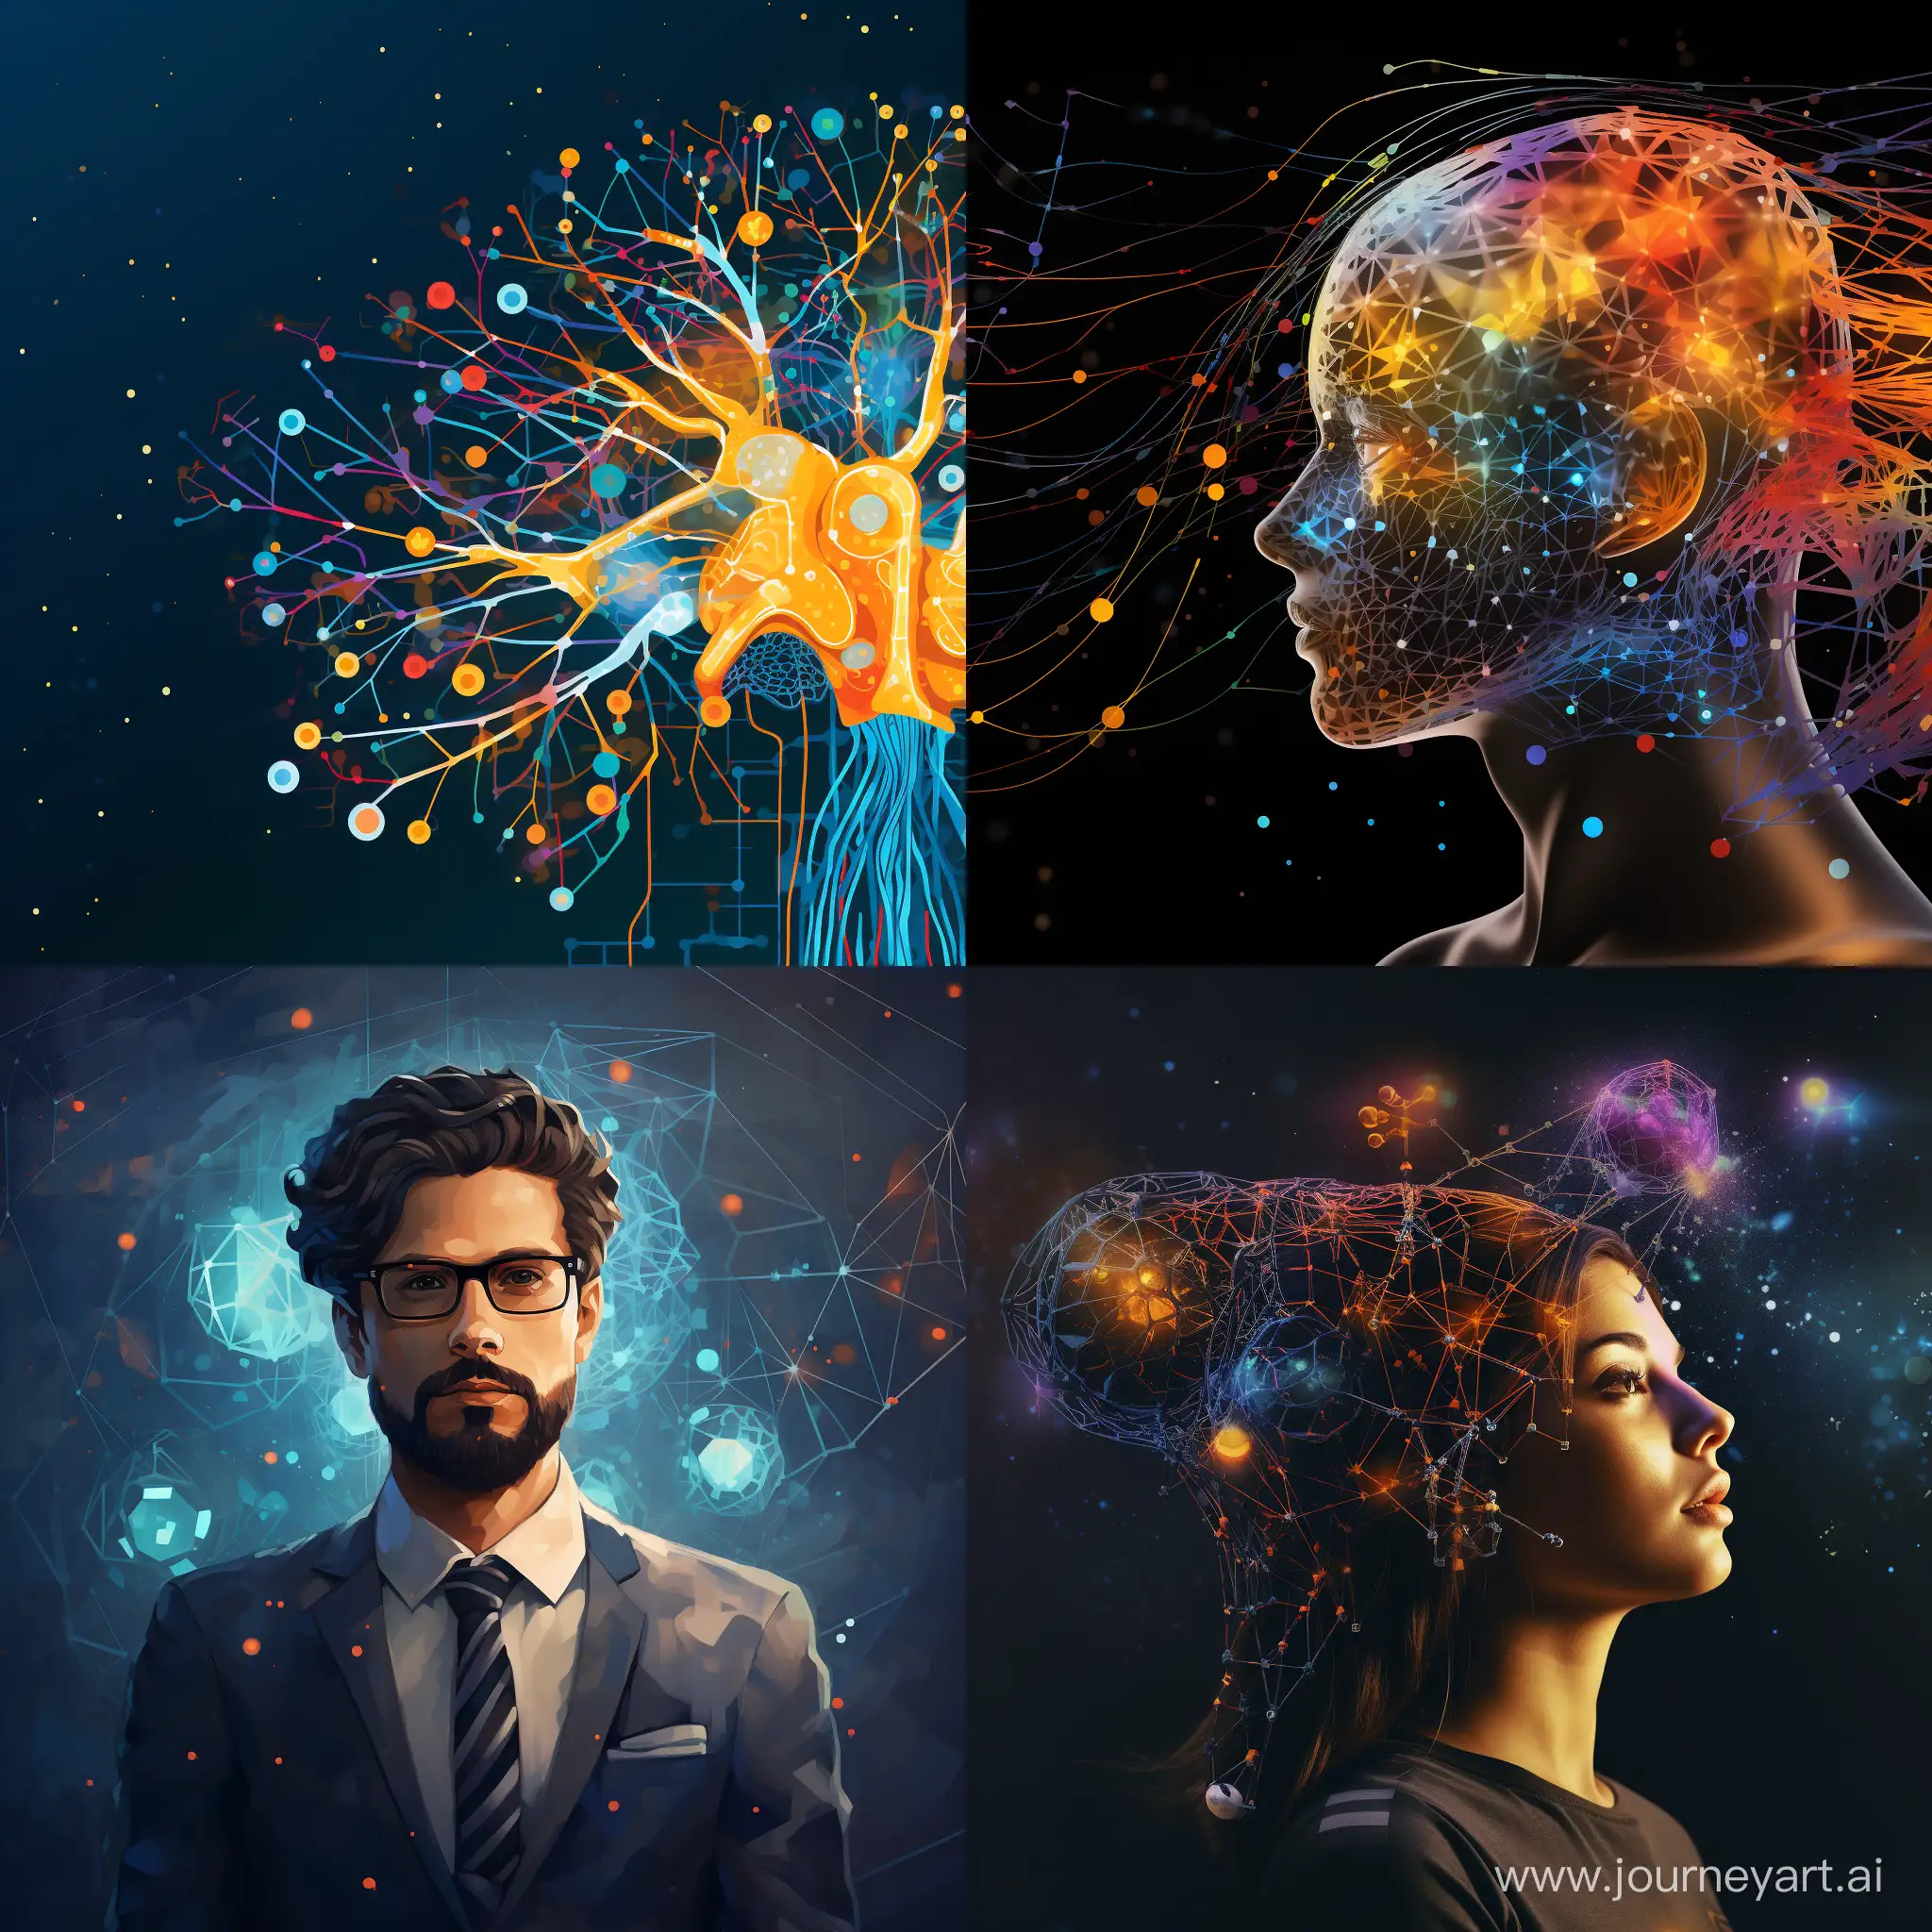 header for LinkedIn profile for someone who interested in cognitive science and computational neuroscience 